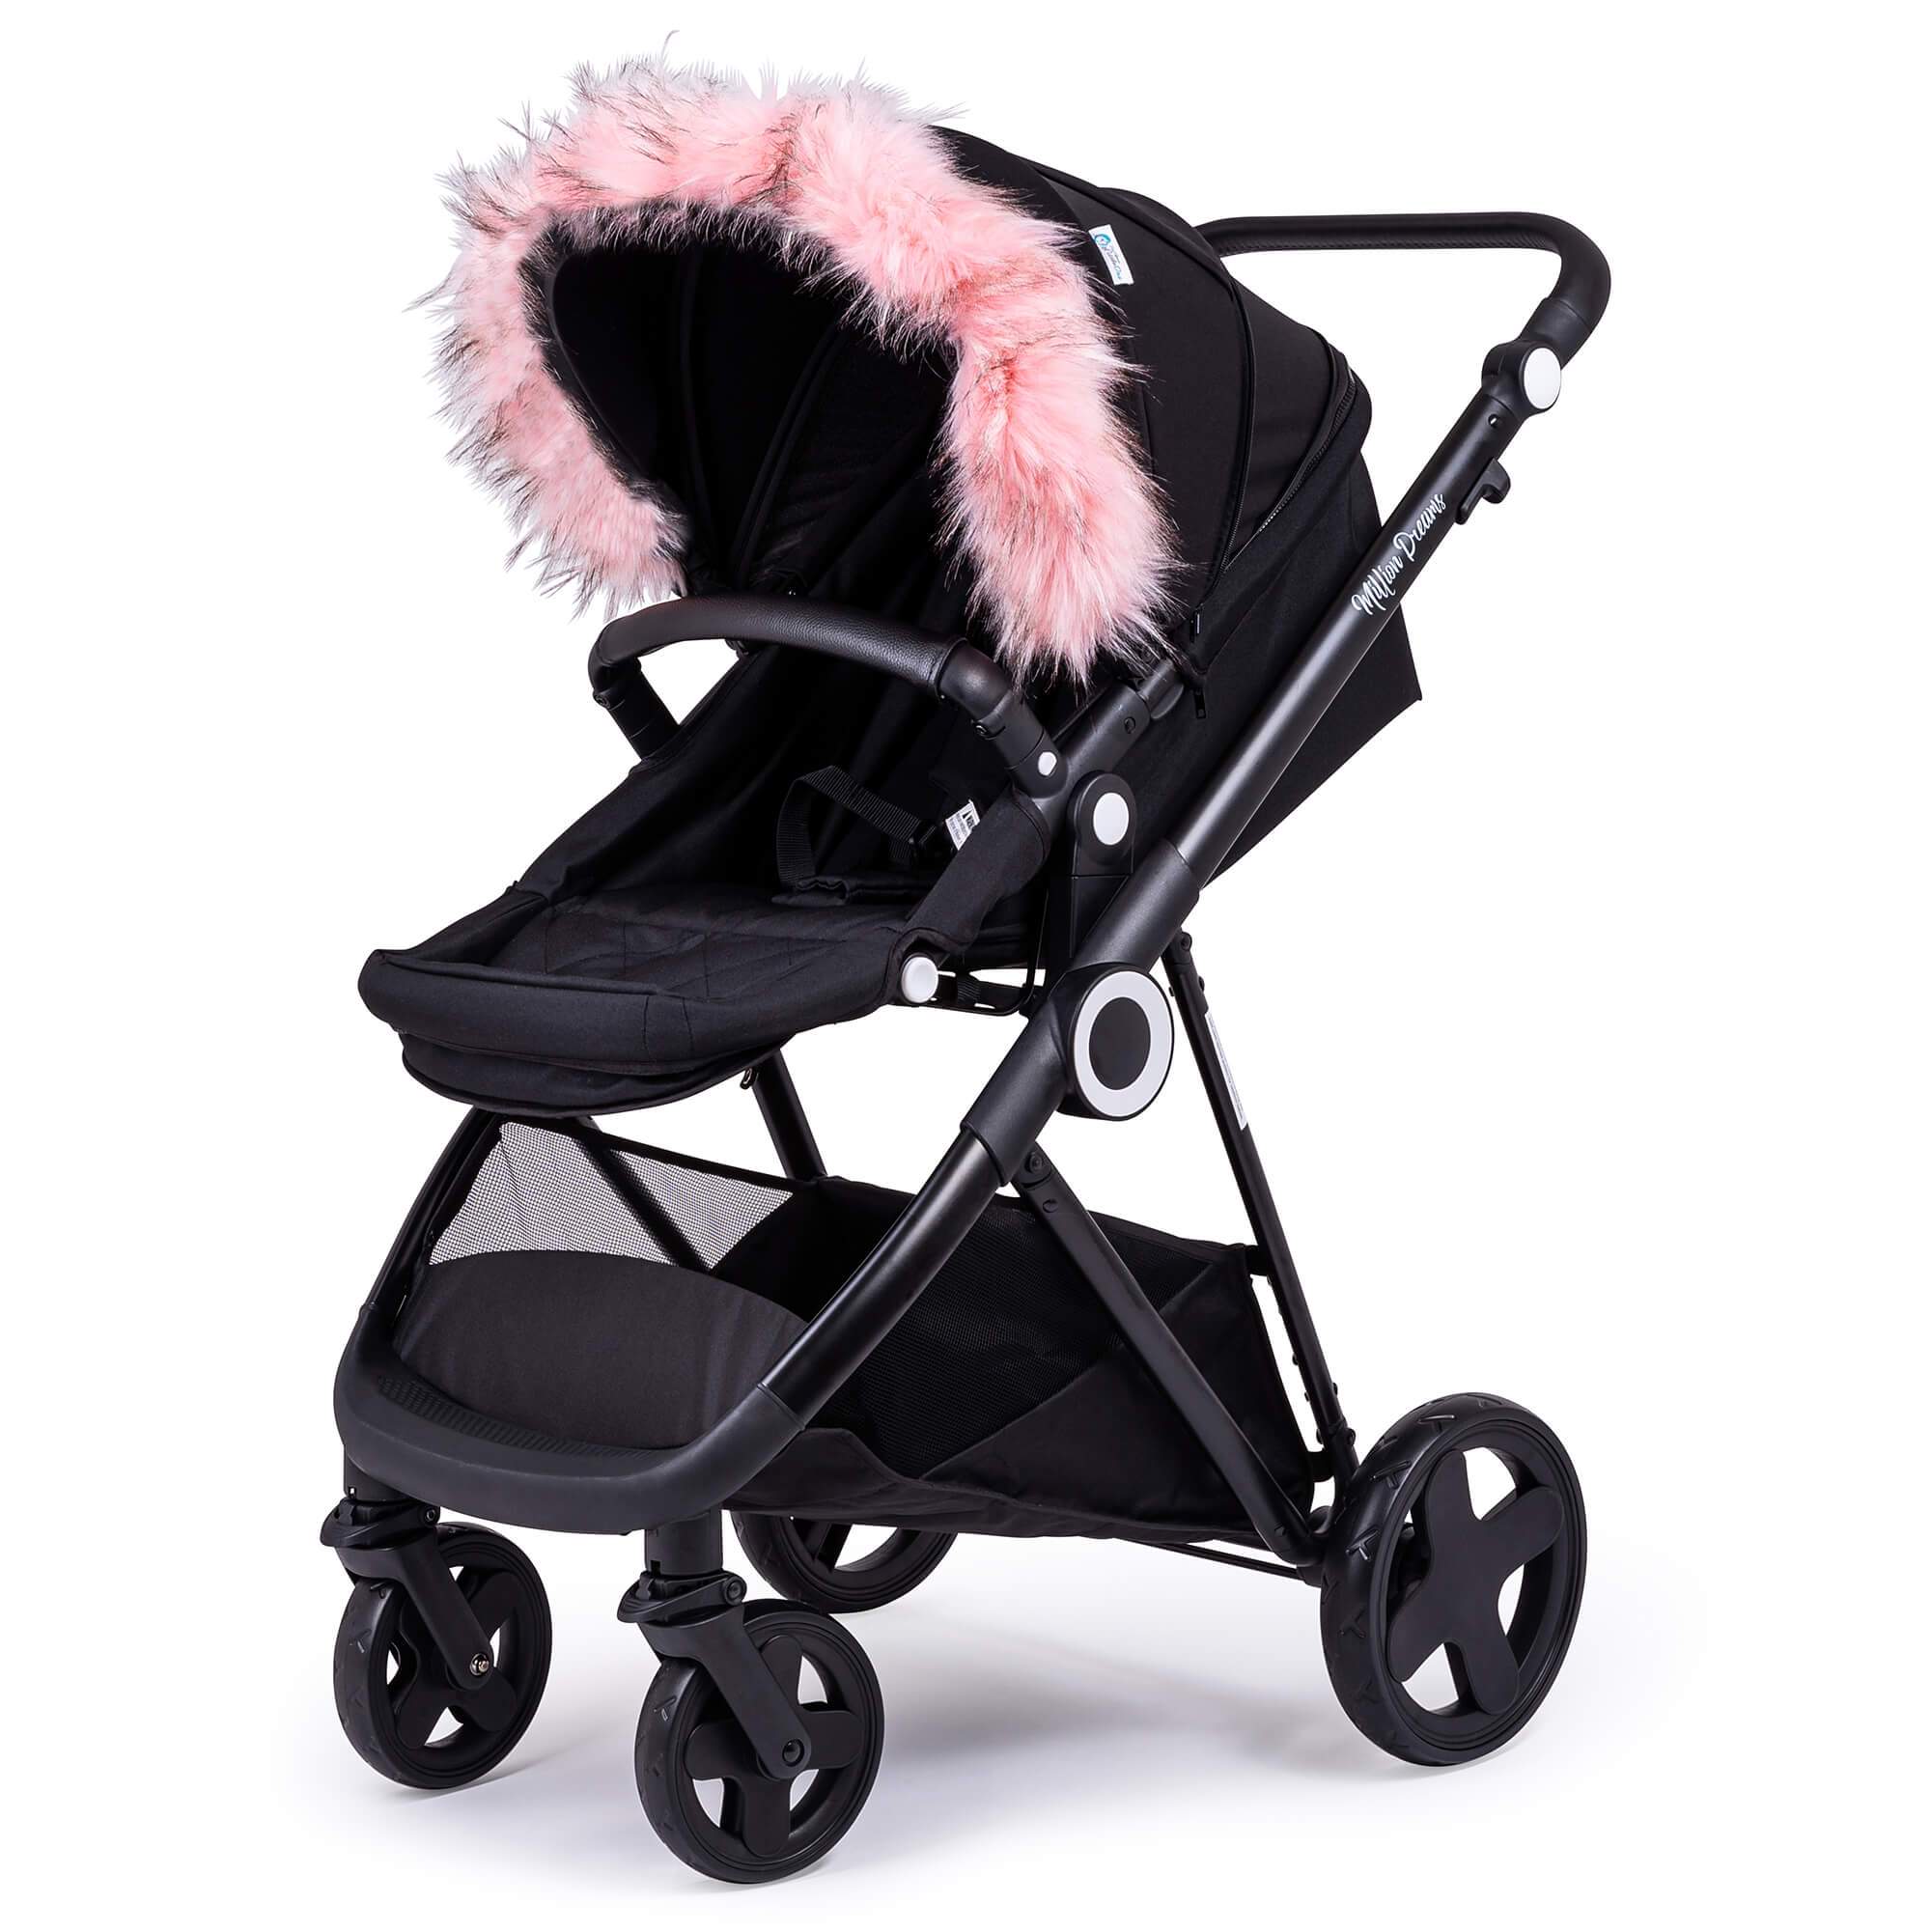 Pram Fur Hood Trim Attachment for Pushchair Compatible with Brio - Light Pink / Fits All Models | For Your Little One